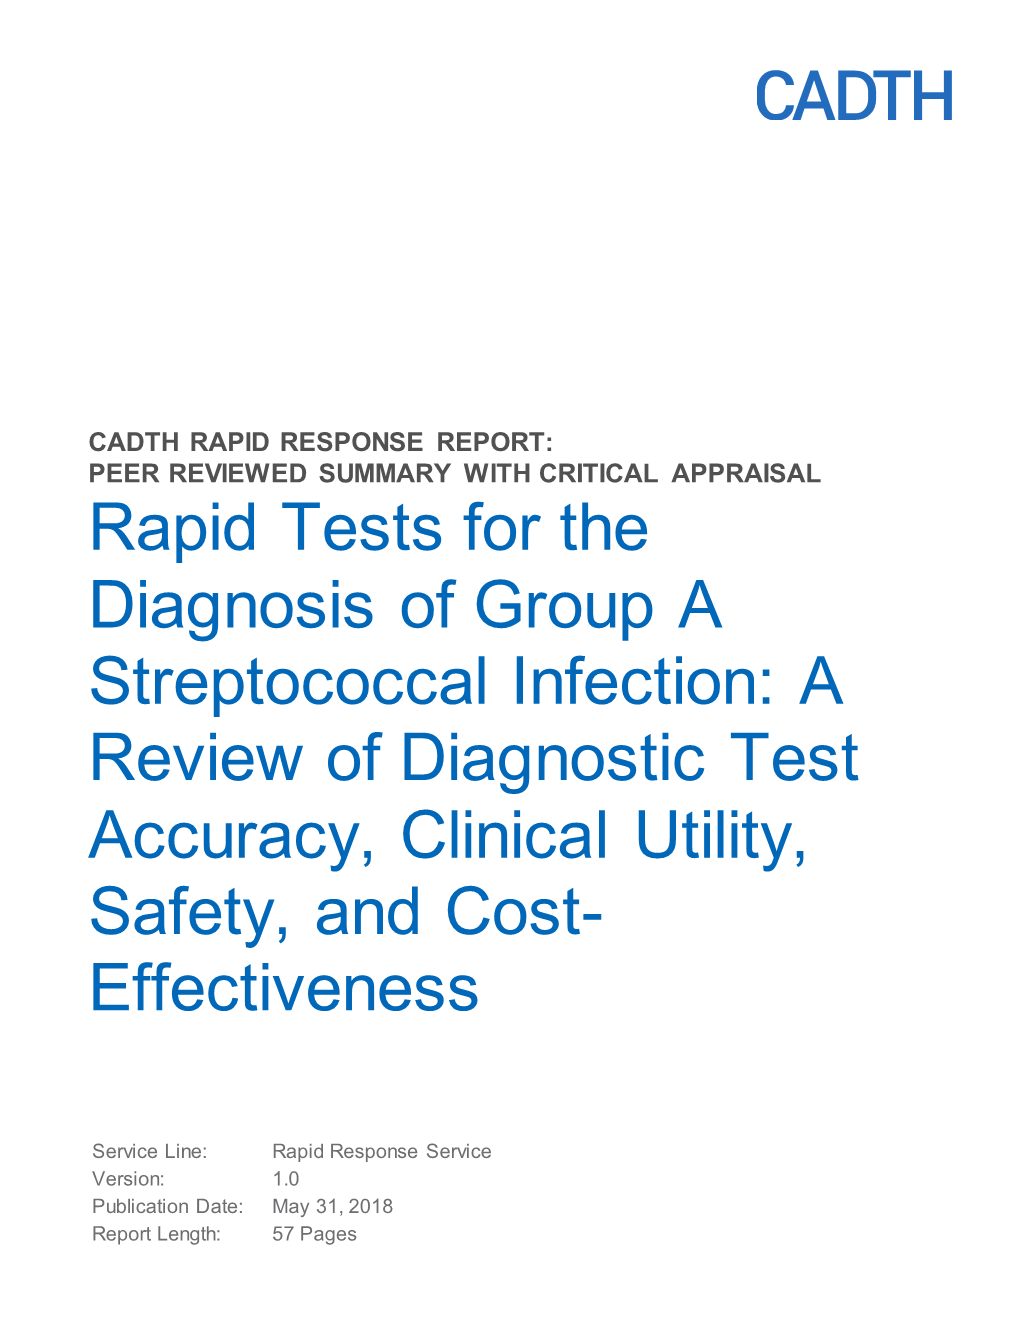 Rapid Tests for the Diagnosis of Group a Streptococcal Infection: a Review of Diagnostic Test Accuracy, Clinical Utility, Safety, and Cost- Effectiveness